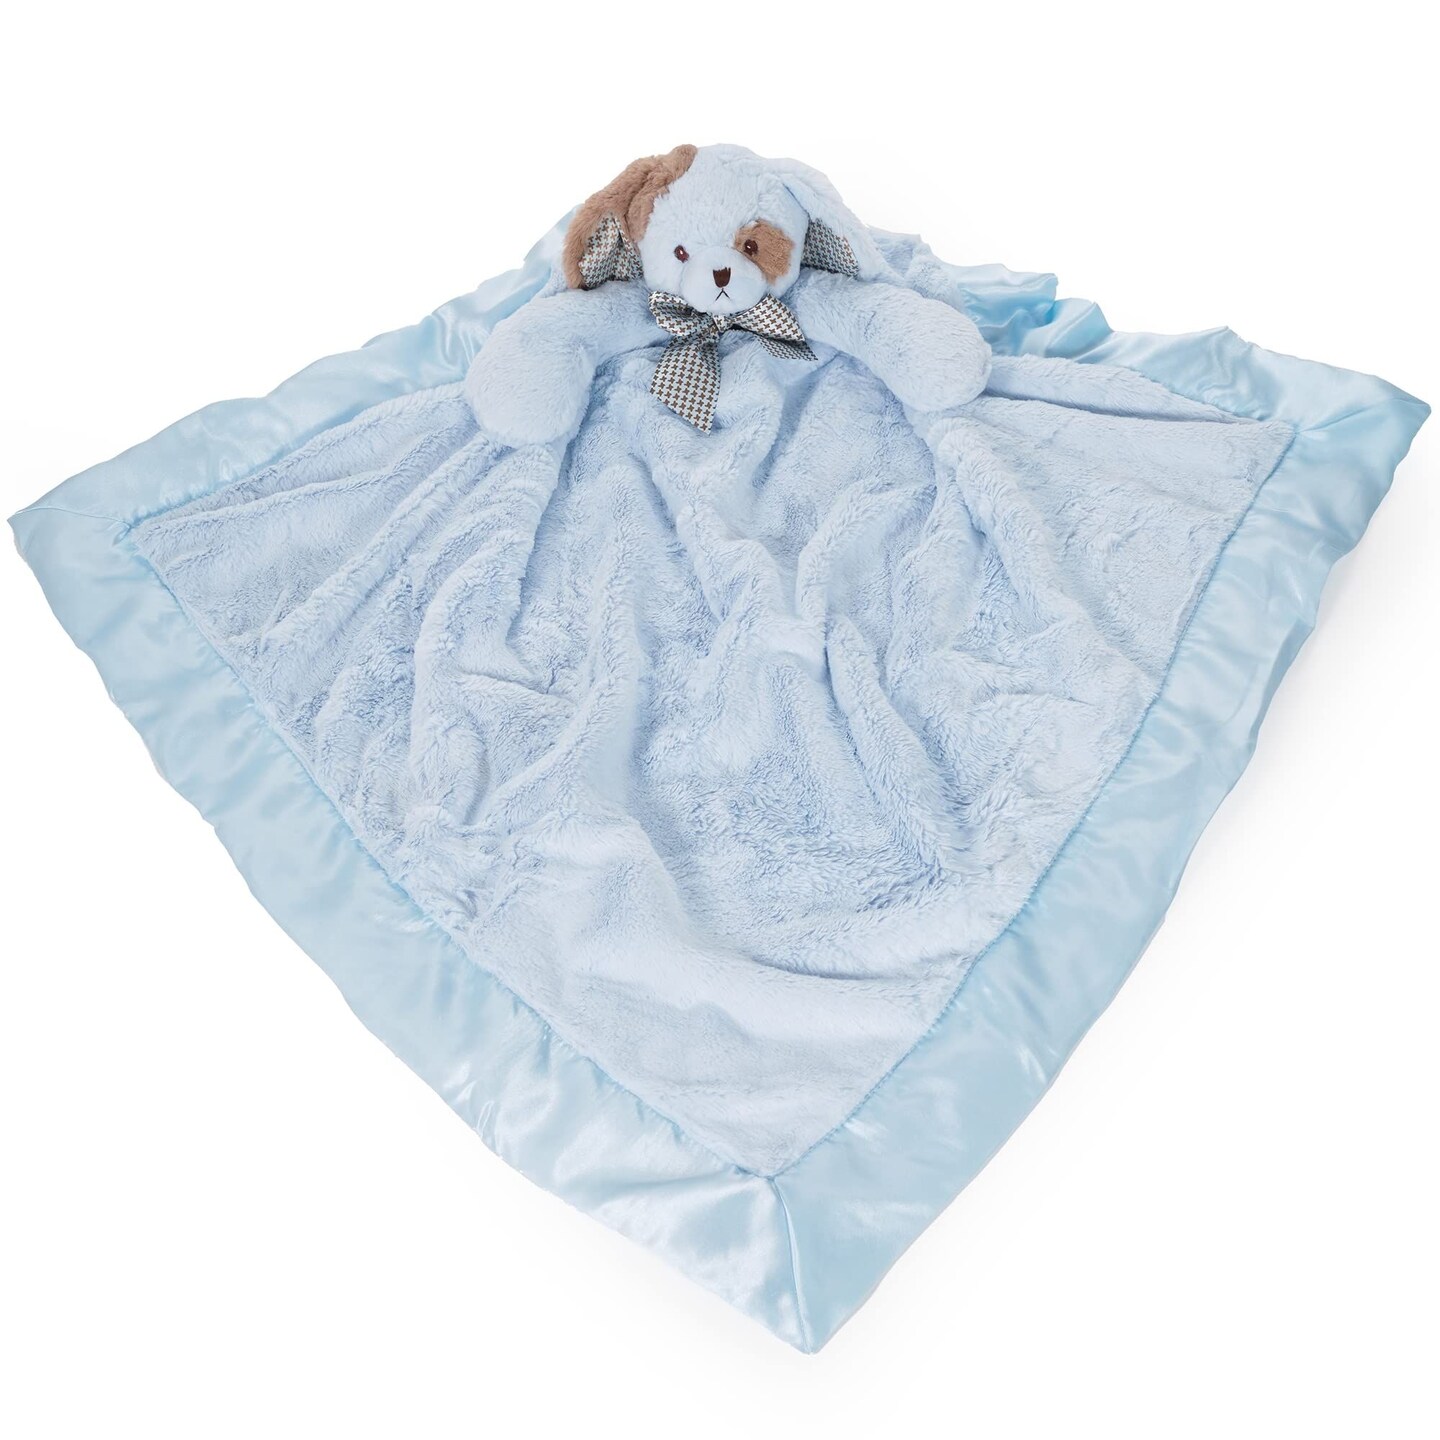 Bearington Waggles The Blue Dog Plush Lovie: Stuffed Animal Security Blanket for Infants, Measures 28.5&#x201D; x 28.5&#x201D; (Stroller Size), Soft Velour with Satin Lining, for Boys &#x26; Girls &#x26; All